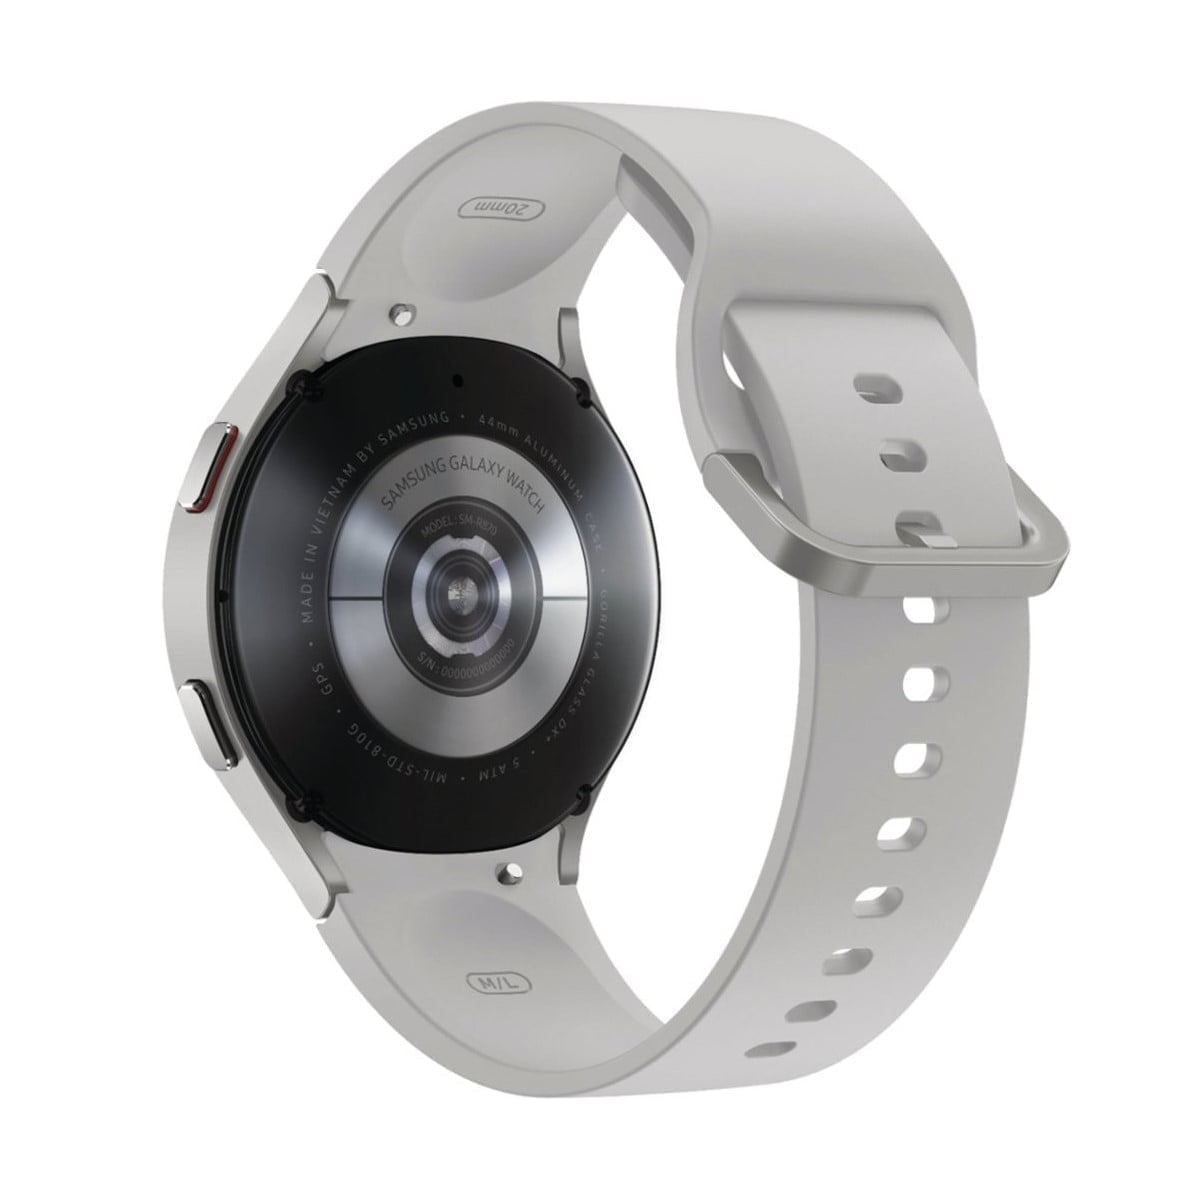 6464609Cv14D Samsung &Lt;H1 Class=&Quot;Heading-5 V-Fw-Regular&Quot;&Gt;Samsung - Galaxy Watch4 Aluminum Smartwatch 44Mm Bt - Silver &Lt;Span Class=&Quot;Product-Data-Label Body-Copy&Quot;&Gt;&Lt;Strong&Gt;Model&Lt;/Strong&Gt;: Sm-R870Nzsaxaa&Lt;/Span&Gt;&Lt;/H1&Gt; Https://Youtu.be/Plte1N8Pl90 &Lt;Div&Gt;Crush Workouts And All Your Health Goals With Samsung Galaxy Watch4. Be Your Best With The Watch That Knows You Best.&Lt;/Div&Gt; &Lt;Div&Gt;We All Want To Know More About Ourselves, So We Can Be The Best Version Of Ourselves. That'S Why We Engineered The All-New Galaxy Watch4 Classic To Be The Stylish Companion To Your Journey Towards A Healthier You Some Looks Are Timeless, Like The Galaxy Watch4 Classic’s Rotating Bezel And Vivid Screen. The Refined Design Adds Sophistication To Your Wrist For An Elevated Style. Its High-End Stainless Steel Materials Shows Off Its Powerful And Intuitive Functionality&Lt;/Div&Gt; Samsung Watch 4 Samsung Galaxy Watch 4 Aluminum Smartwatch 44Mm Bt - Silver